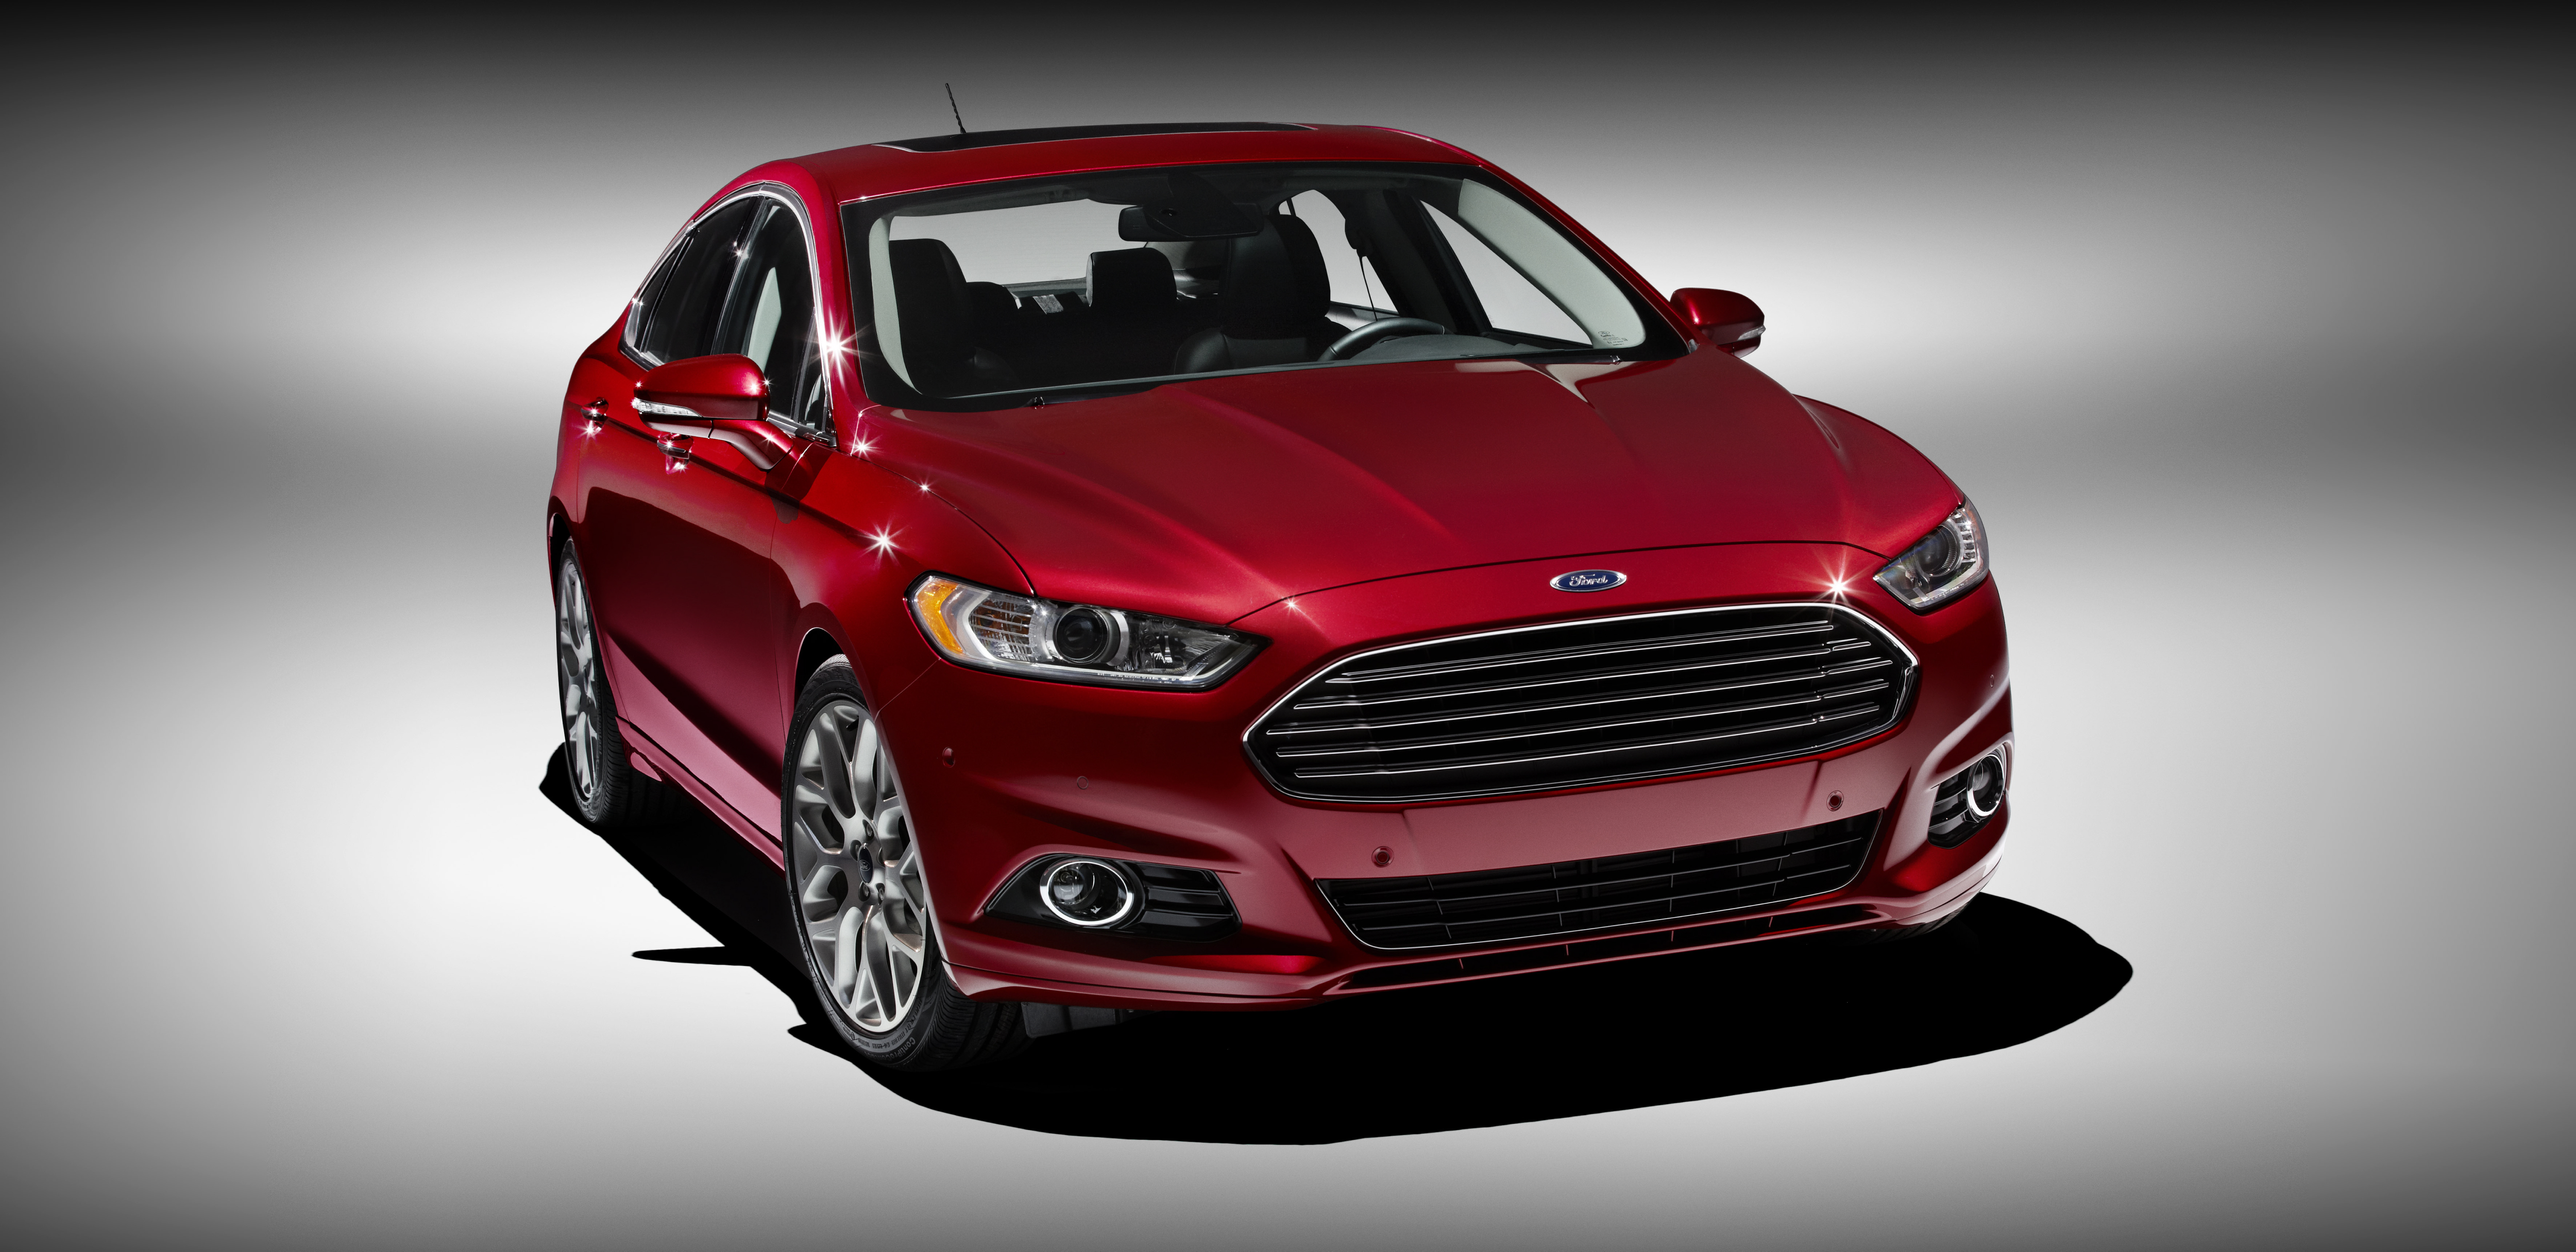 Ford fusion recall engine fires